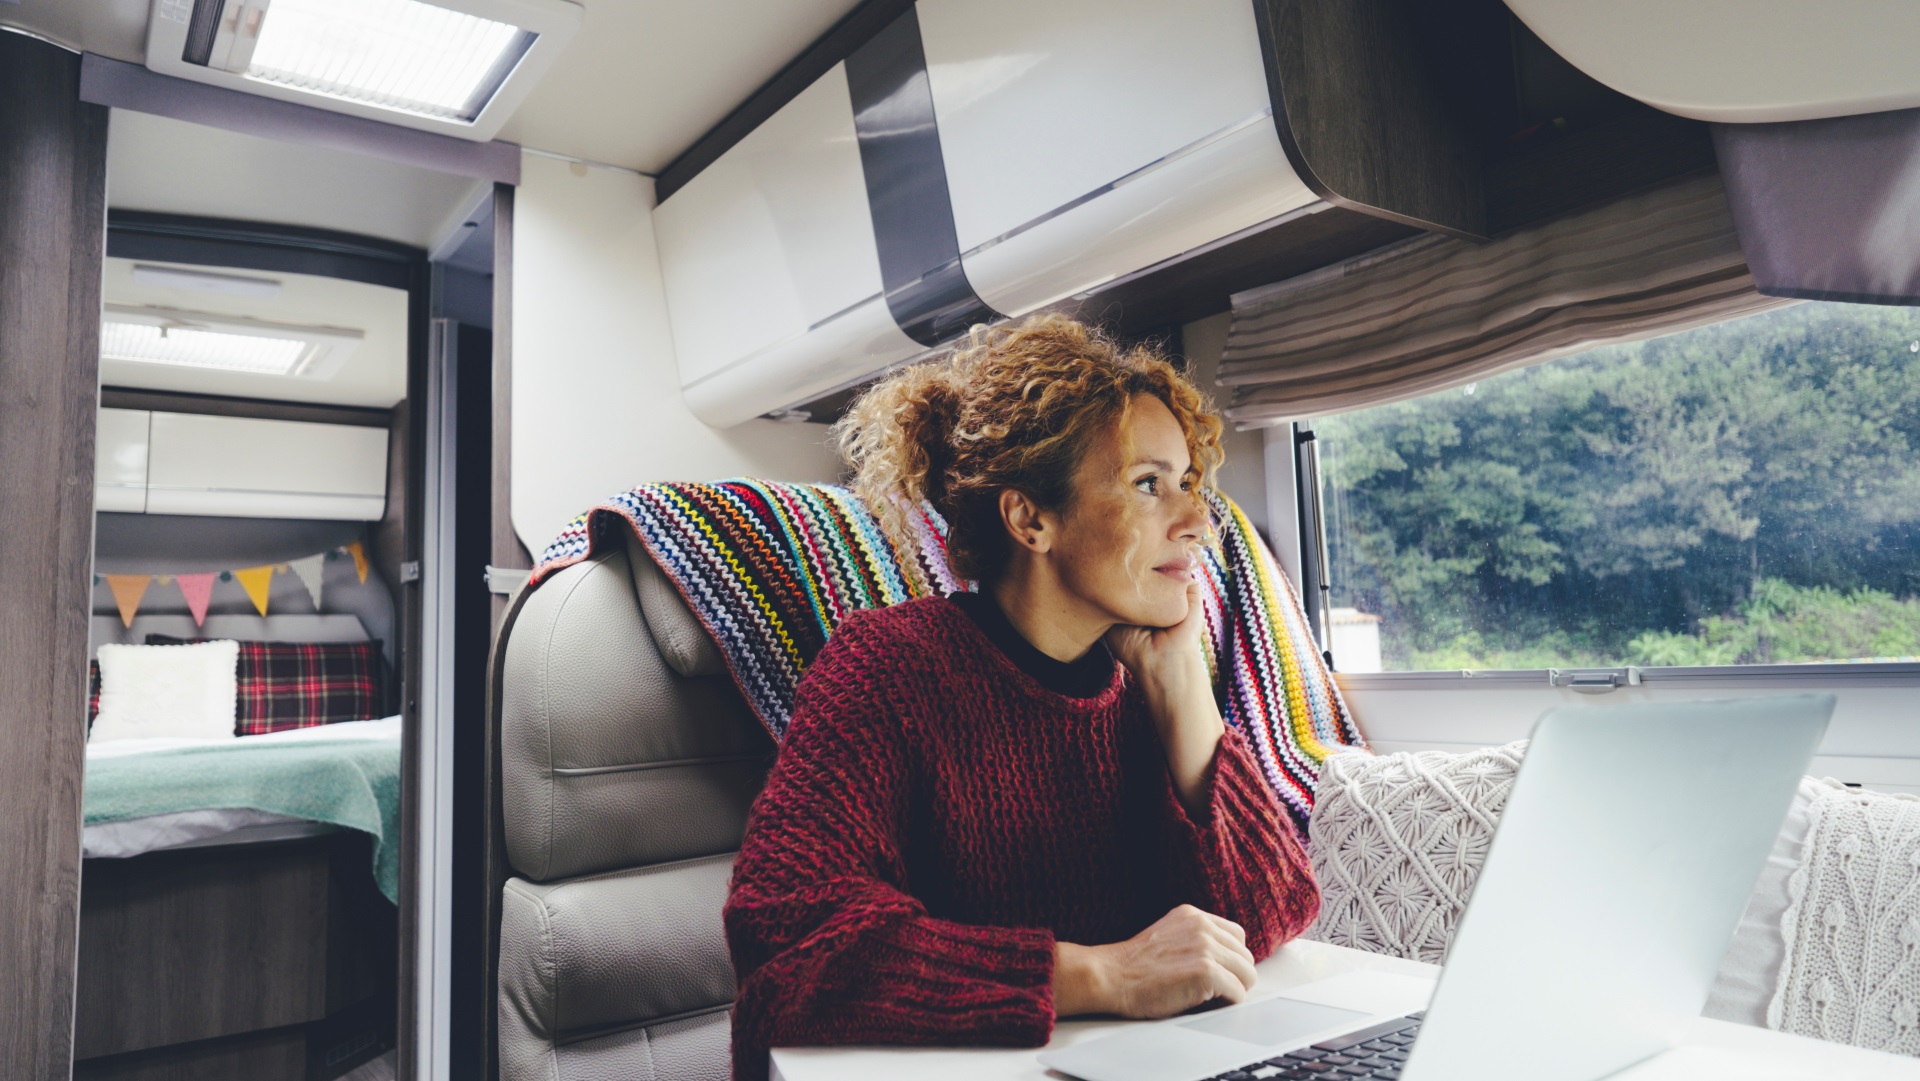 Tips for long term camping. Adult woman use laptop computer inside a camper van. Southern Comfort RV Park.